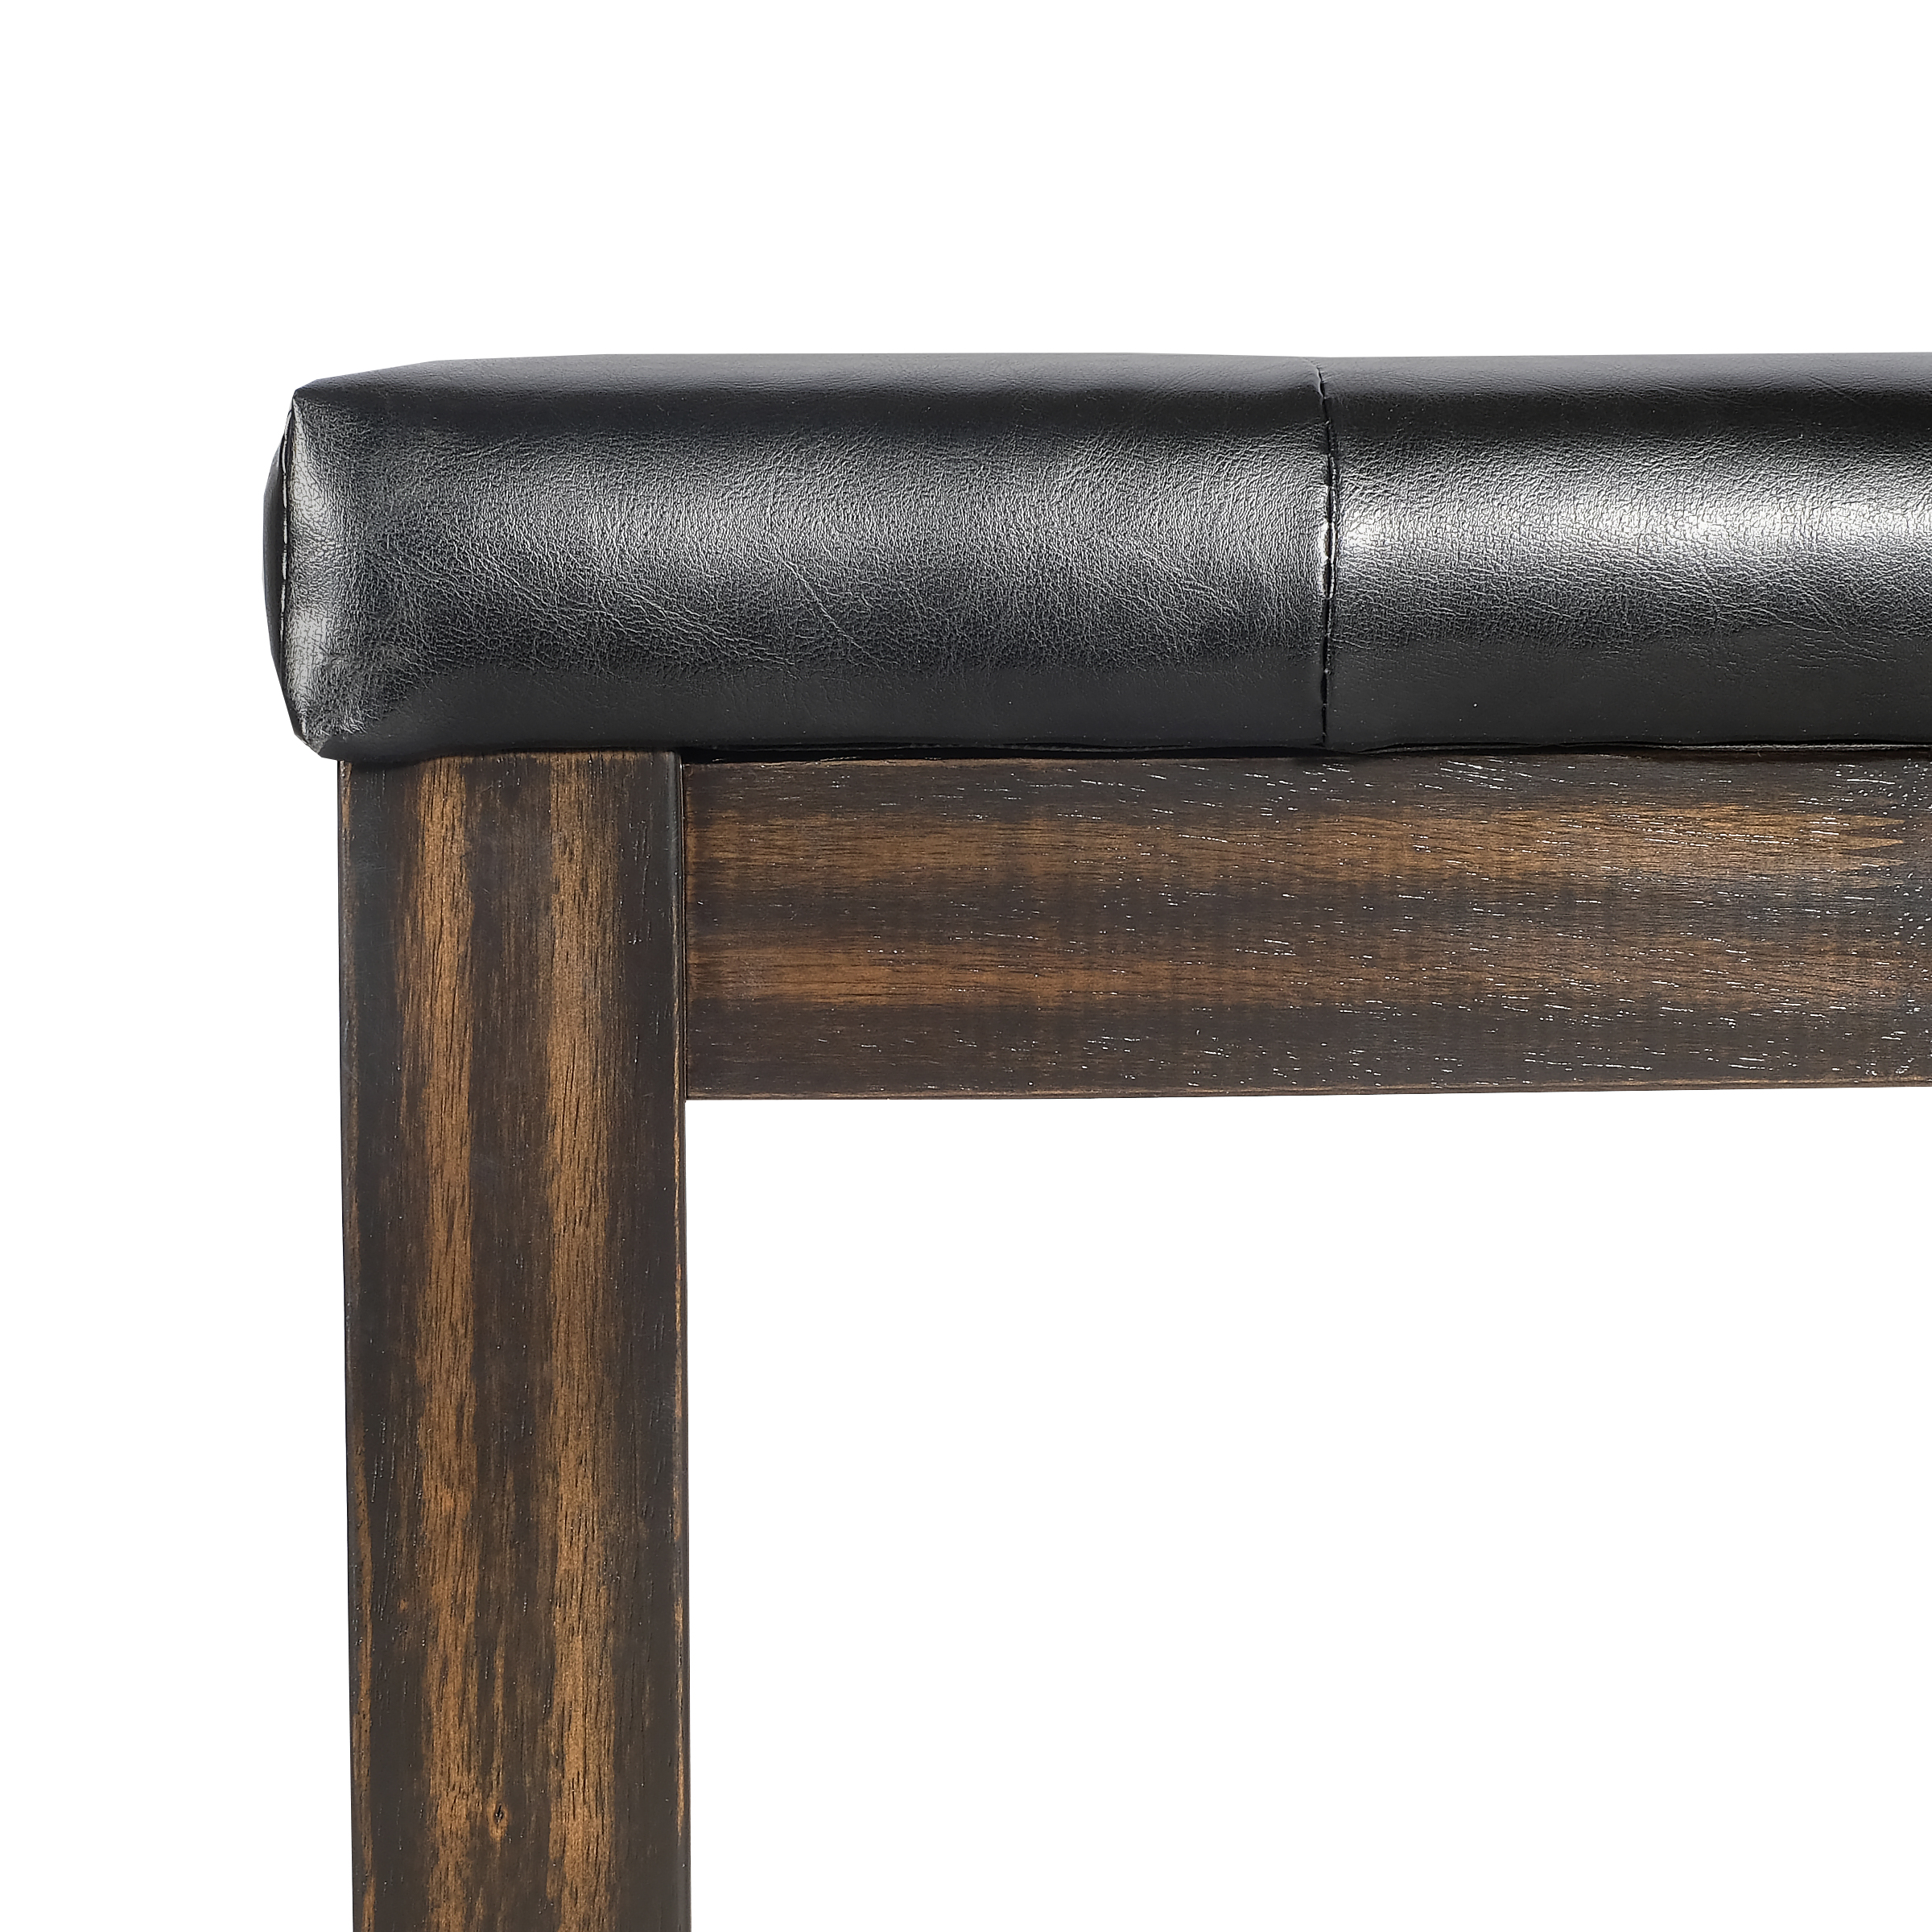 Primo International Charlie Dining Bench - image 5 of 6